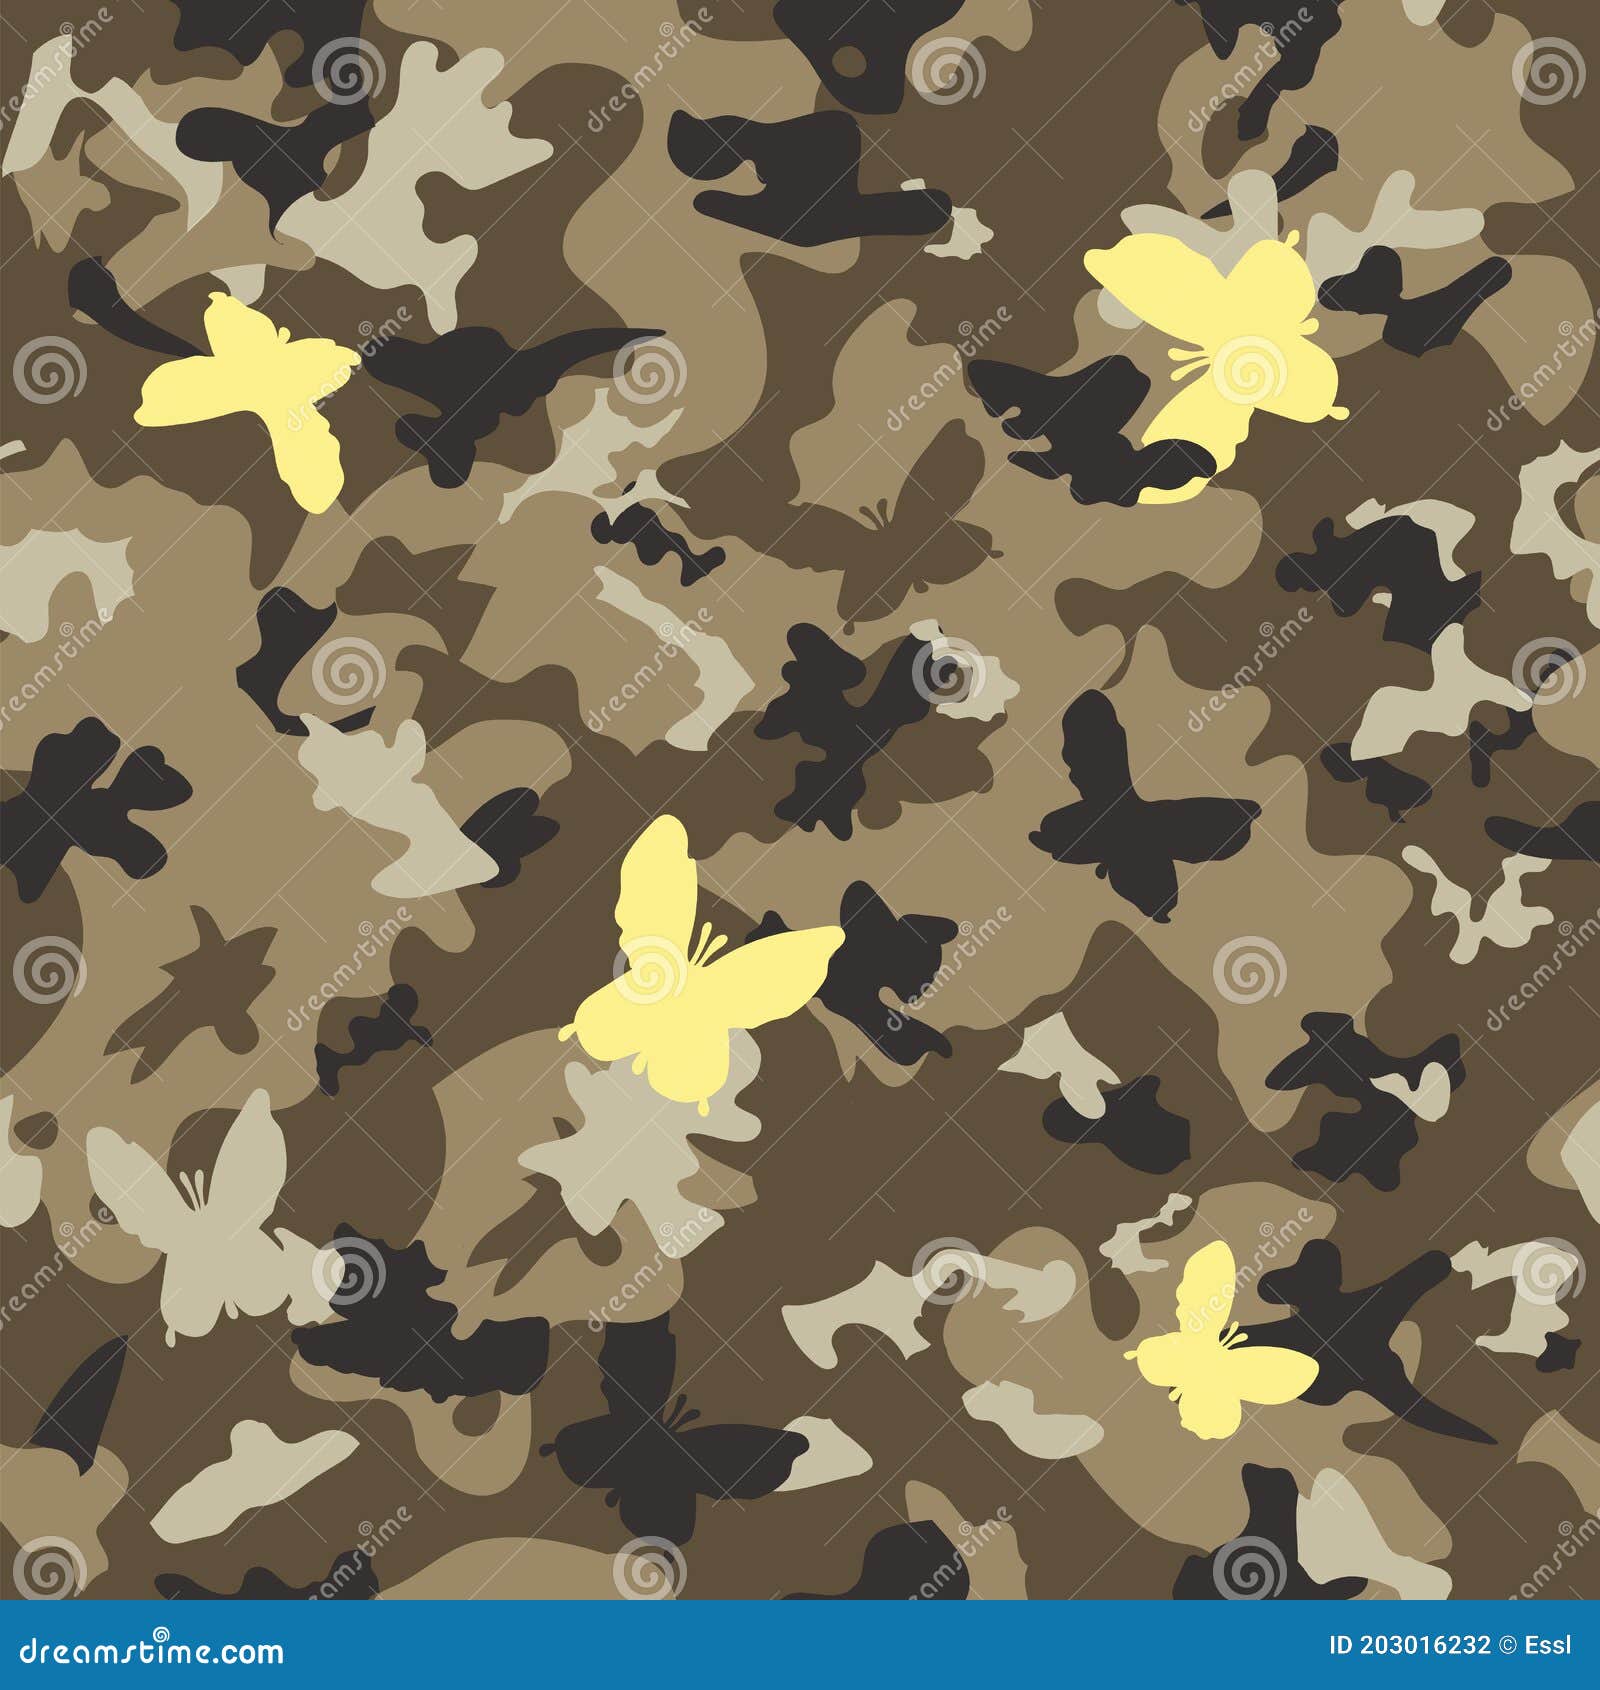 Seamless Classic Camouflage Pattern. Camo Fishing Hunting Vector